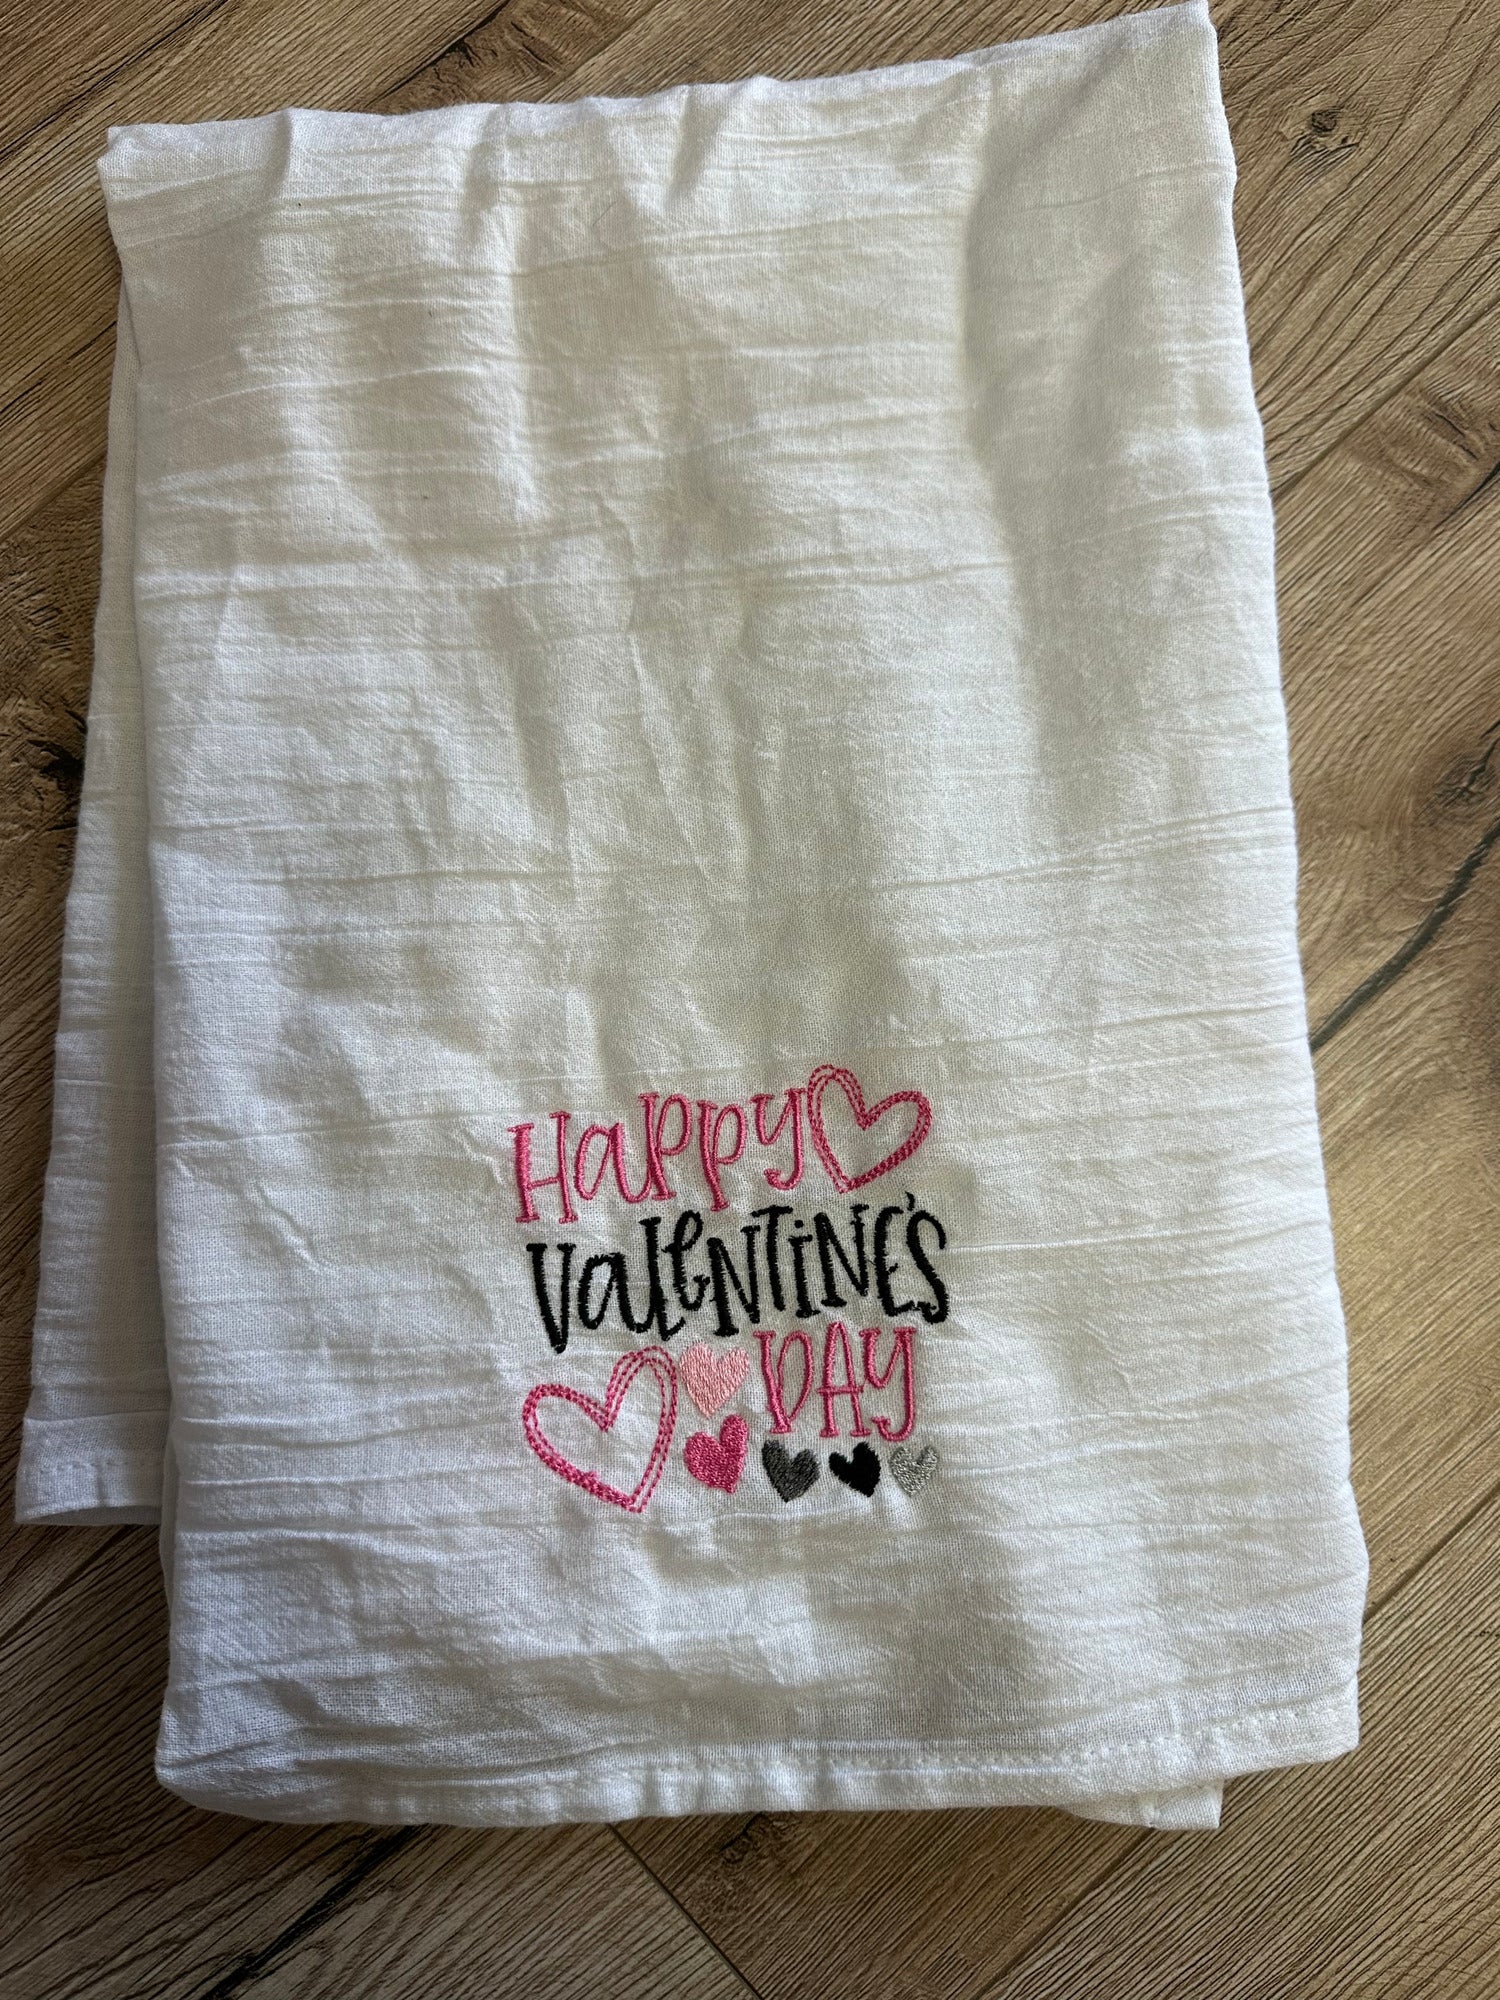 Shop The Special Valentine's Day Collection Of Ta-Ta Towels